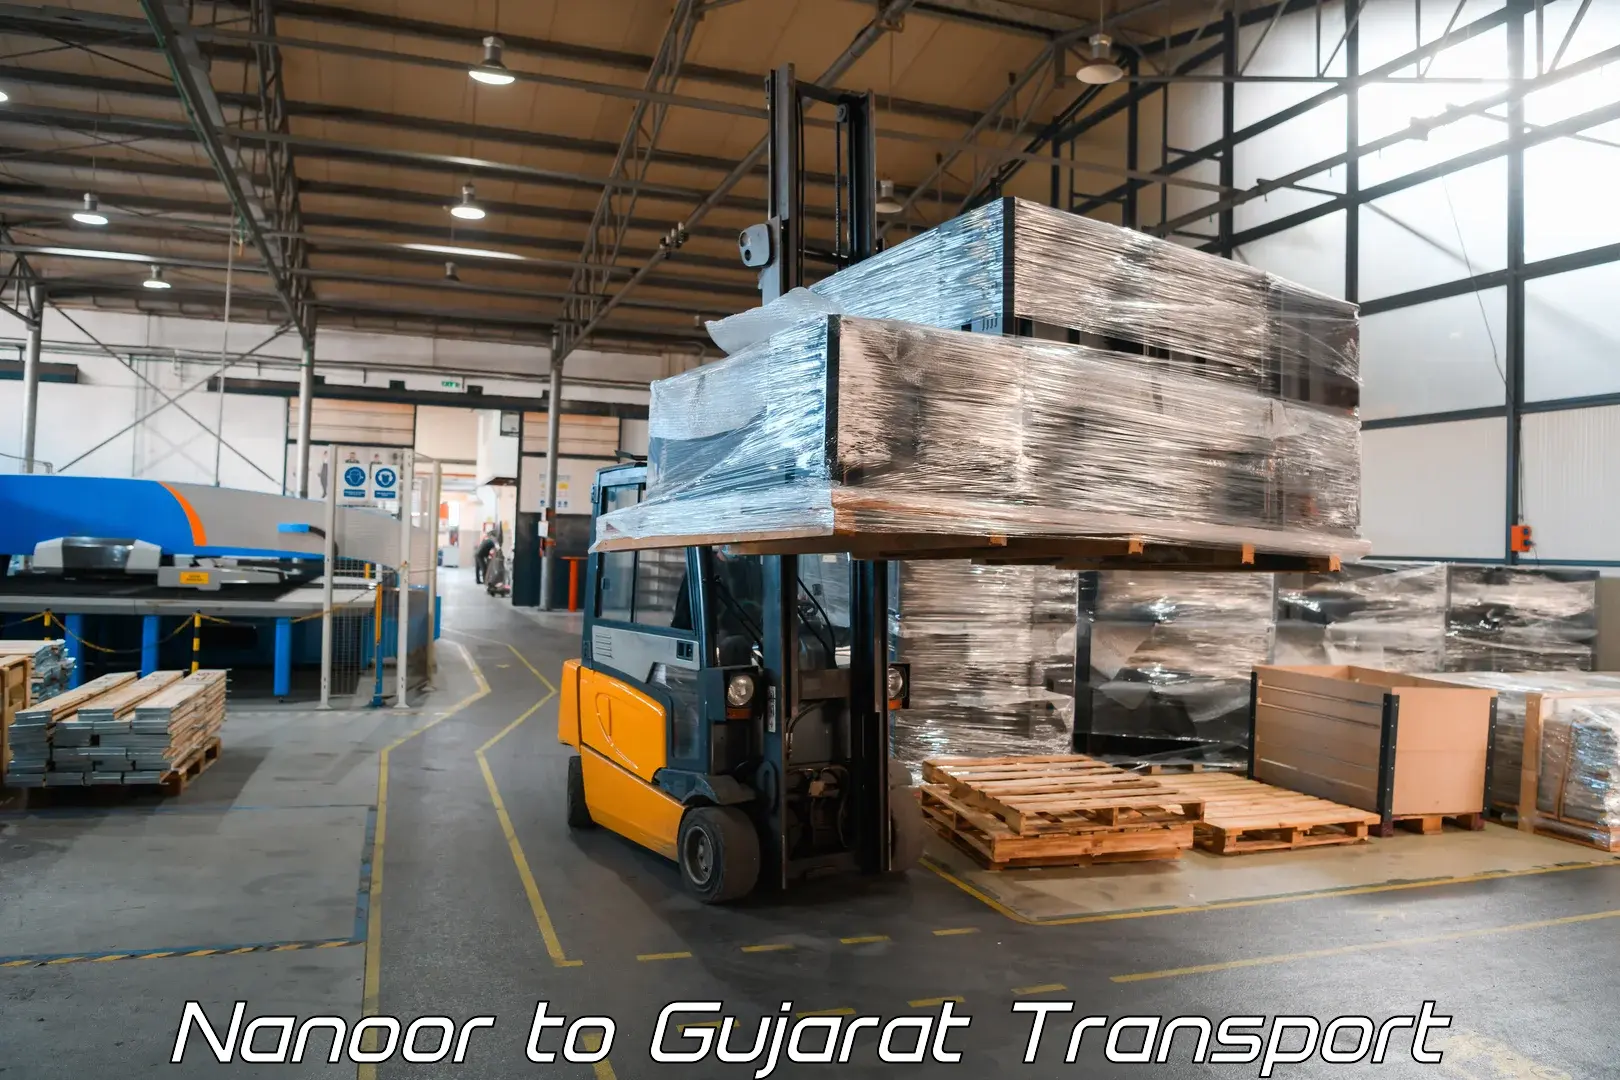 Transport bike from one state to another Nanoor to Gujarat